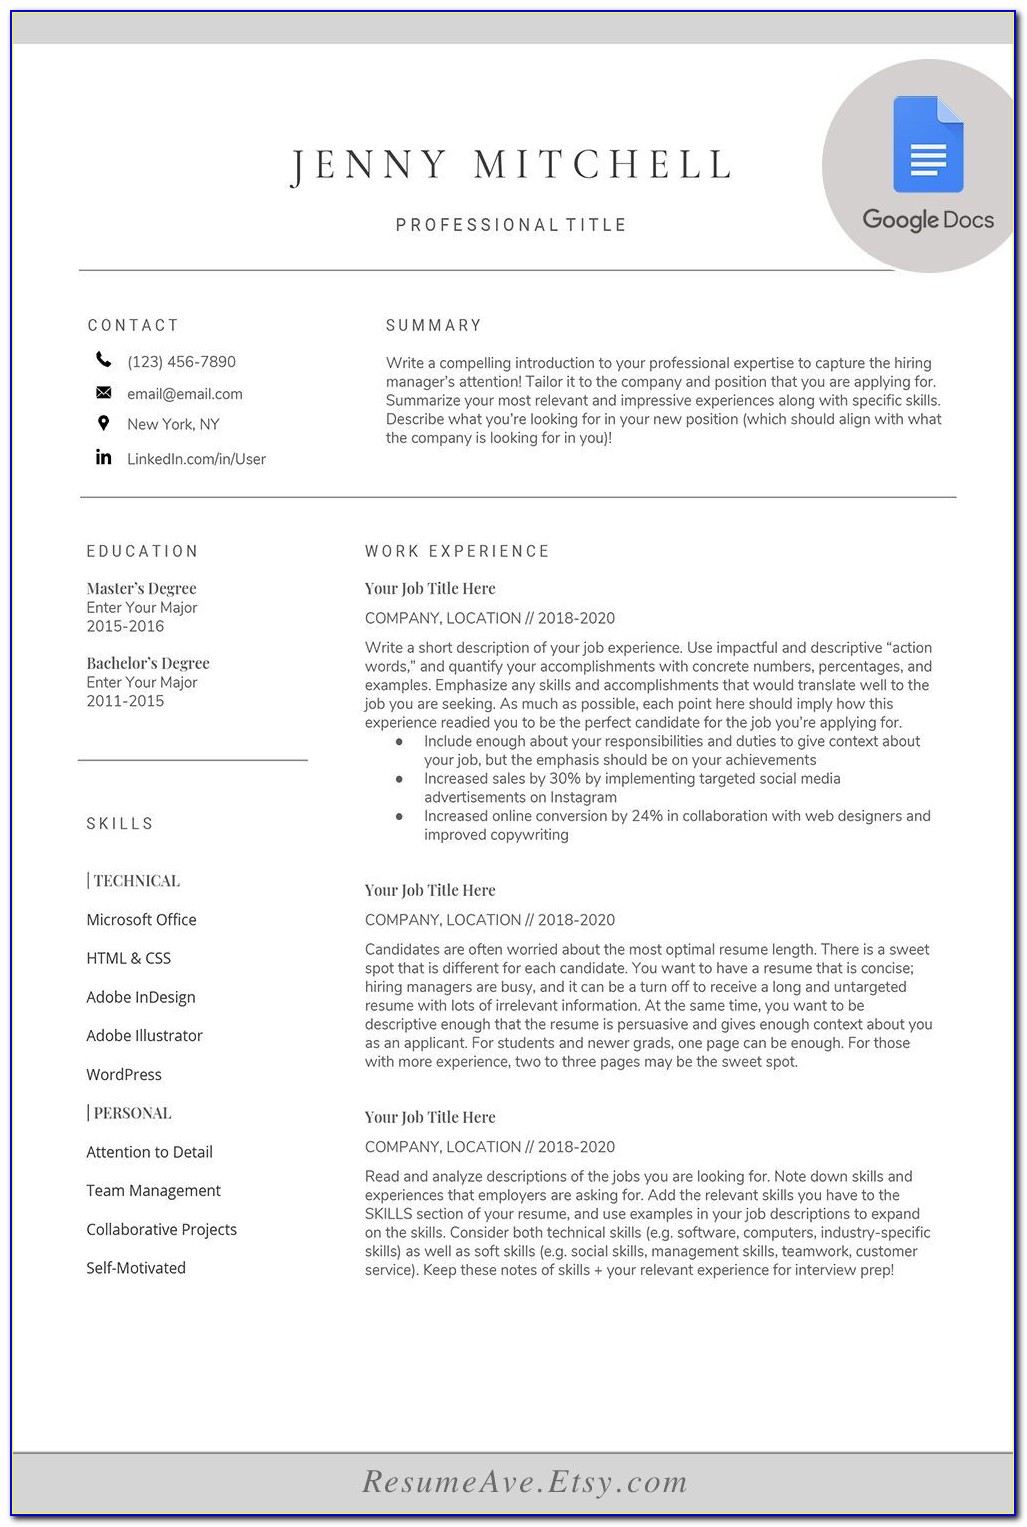 Where To Get A Resume Done Professionally Near Me